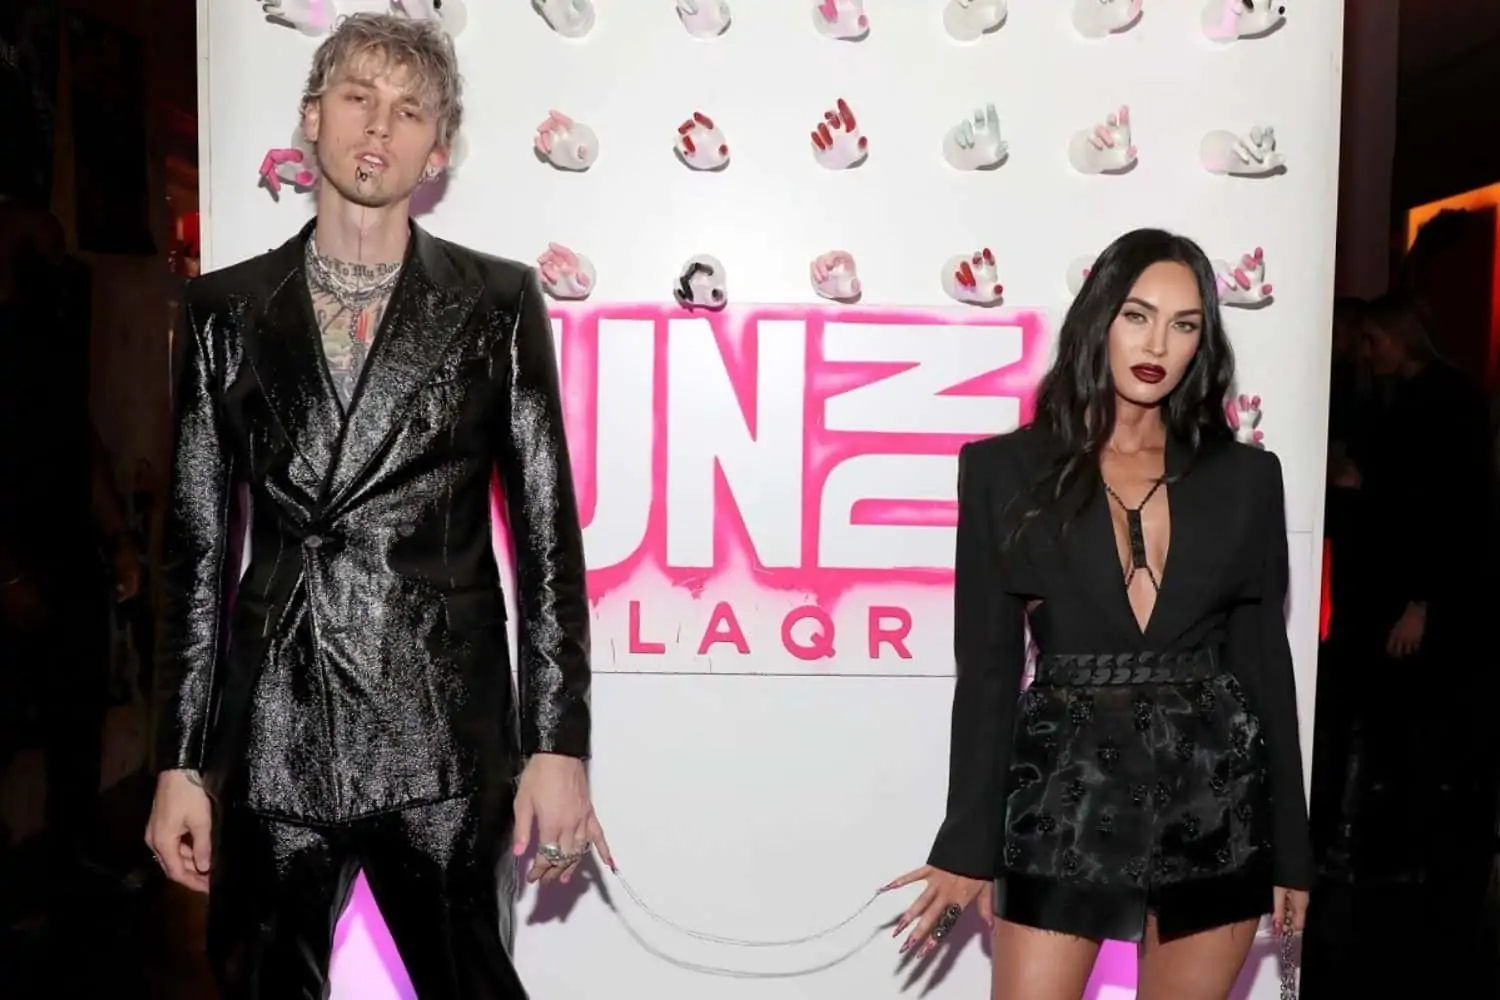 Megan Fox and Machine Gun Kelly are engaged and ... drinking each other's blood